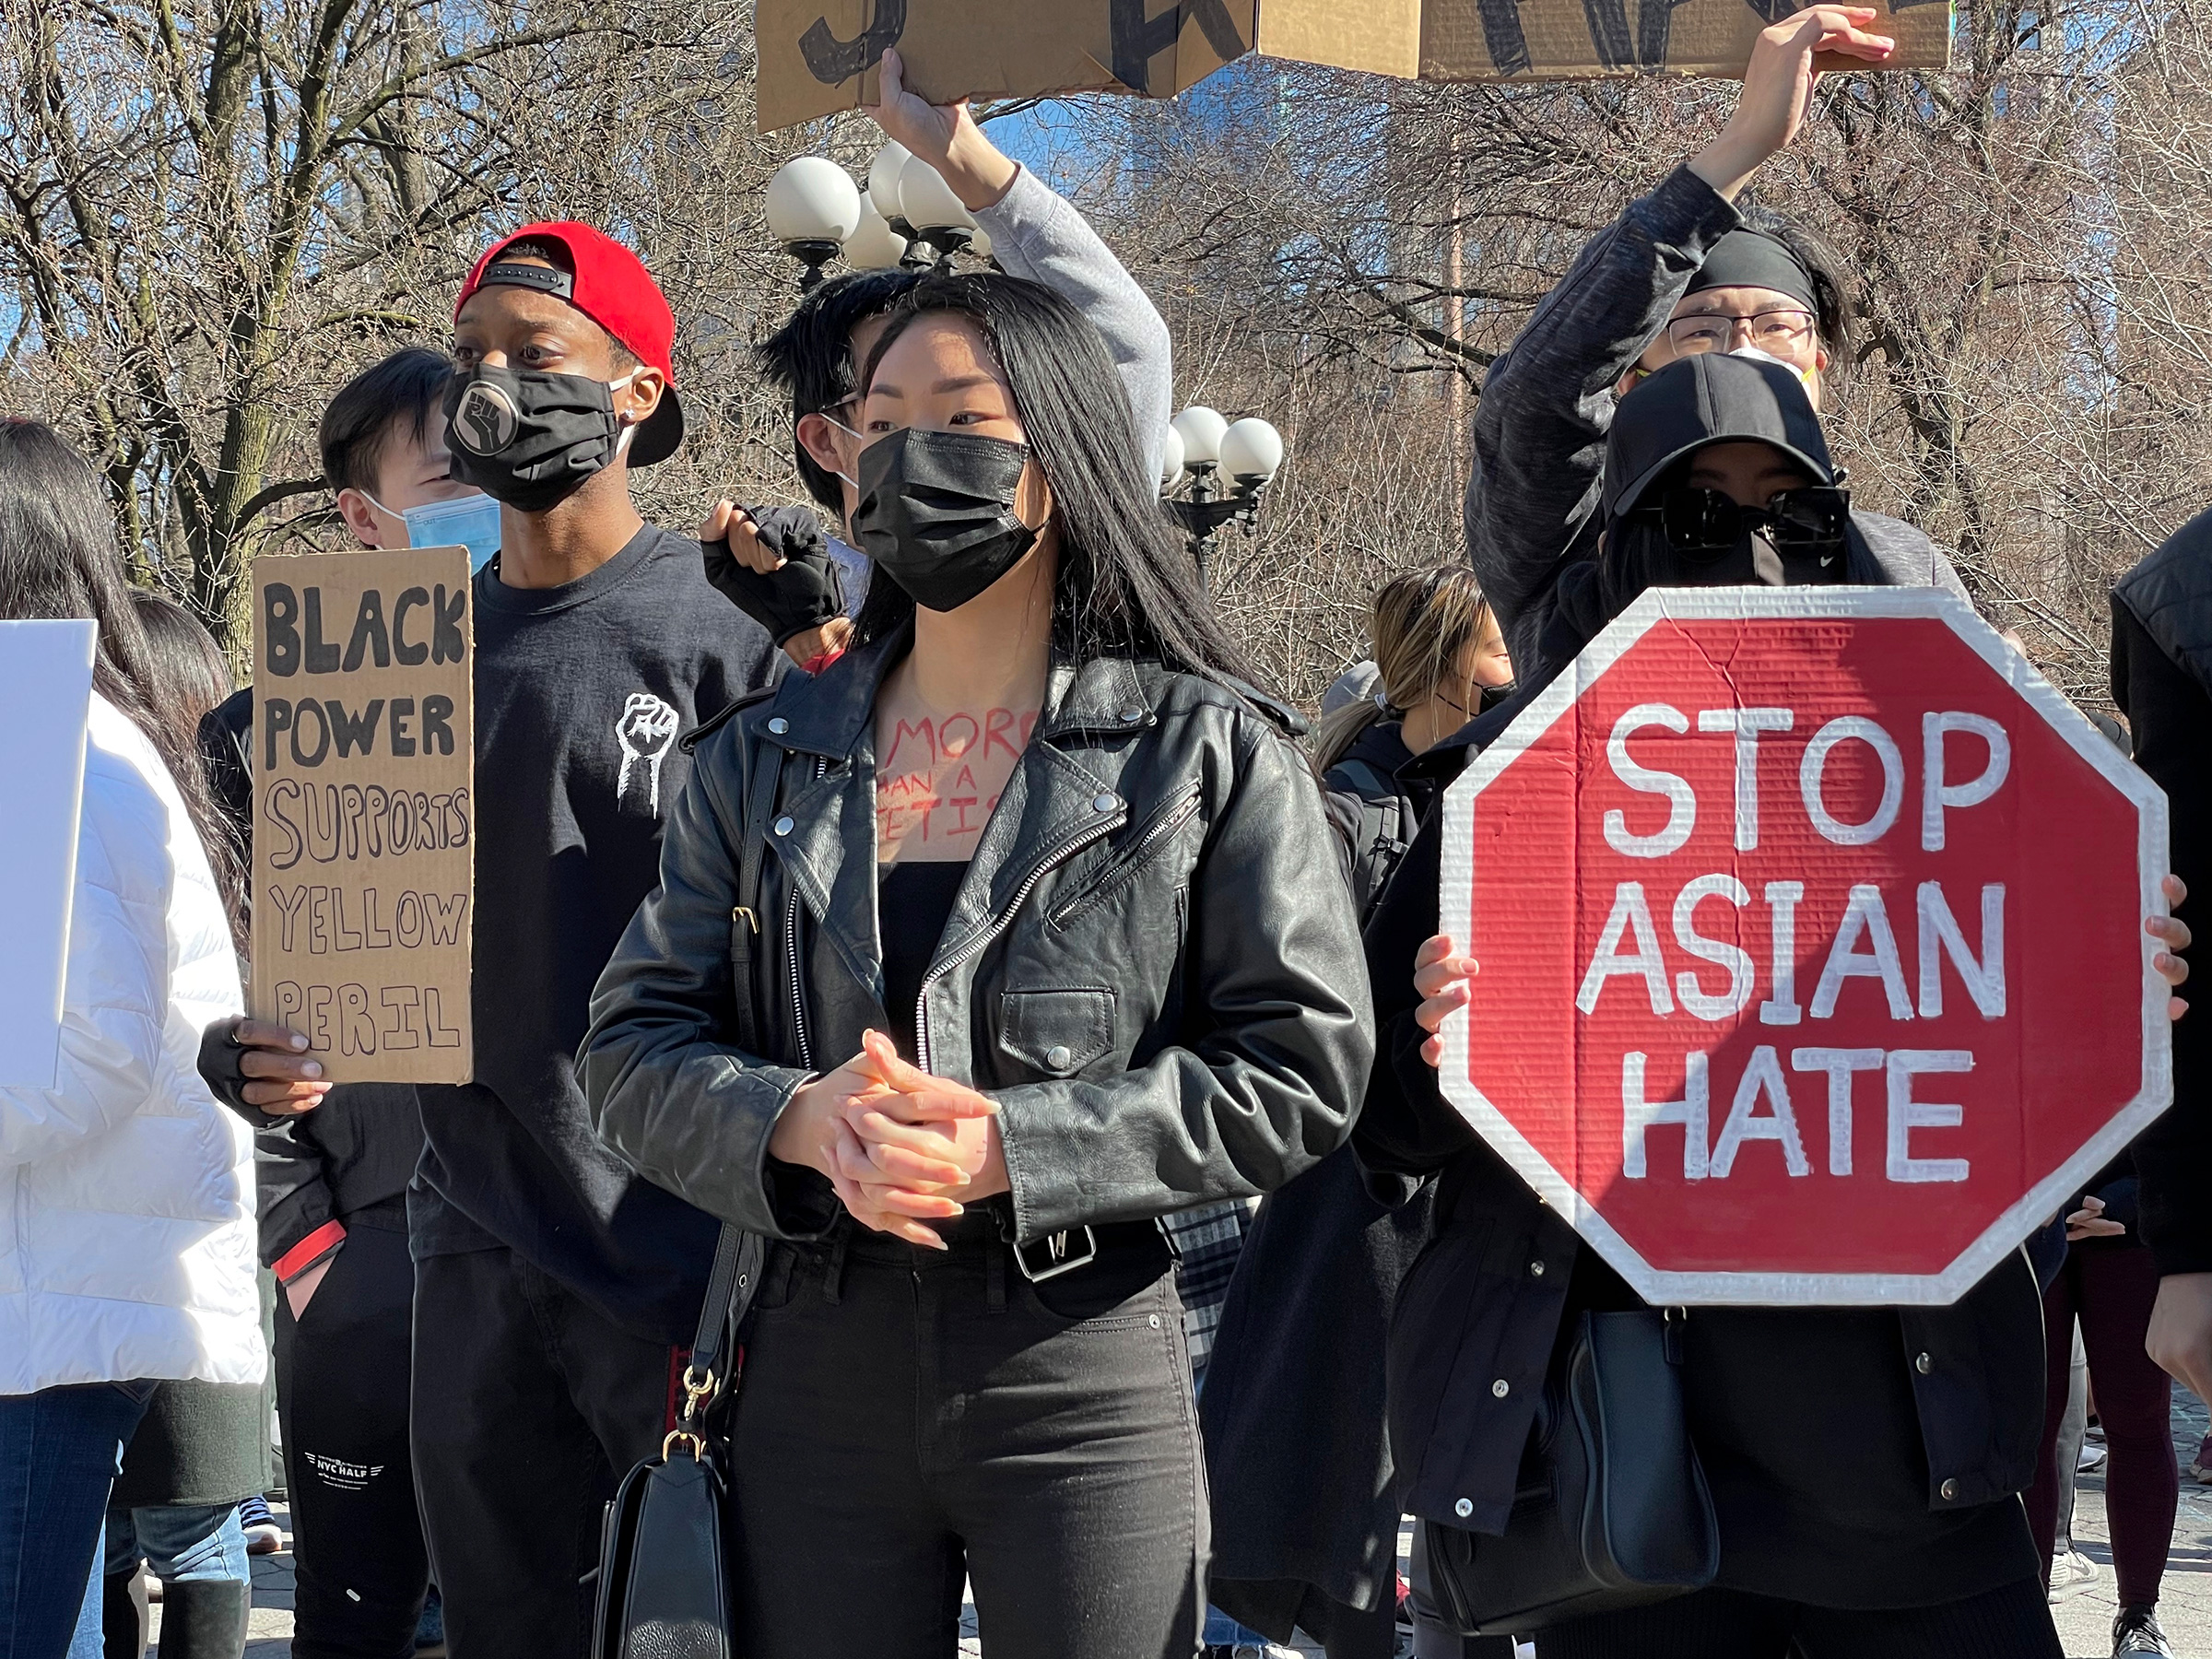 Black and Asian Solidarity Run at Union Square in New York City on March 21. A large crowd of people came together to show their support for the Asian community after the spa killings that occurred recently in Atlanta. (STRF/STAR MAX/IPx)